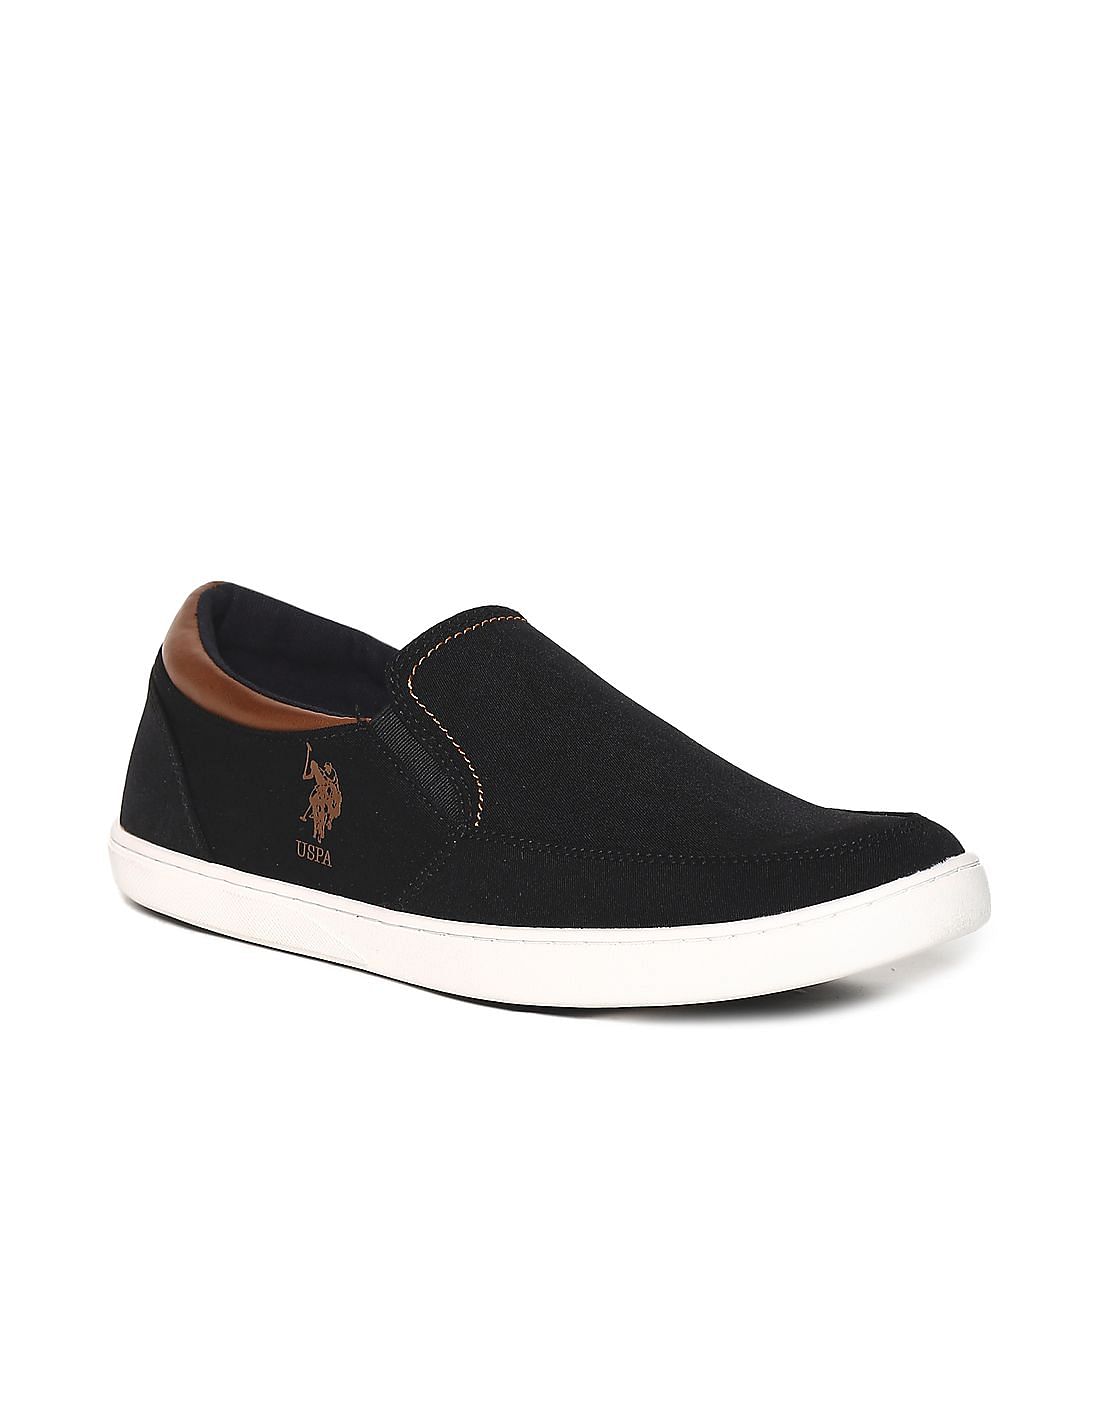 Buy U.S. Polo Assn. Low Top Solid Saric Slip On Shoes - NNNOW.com